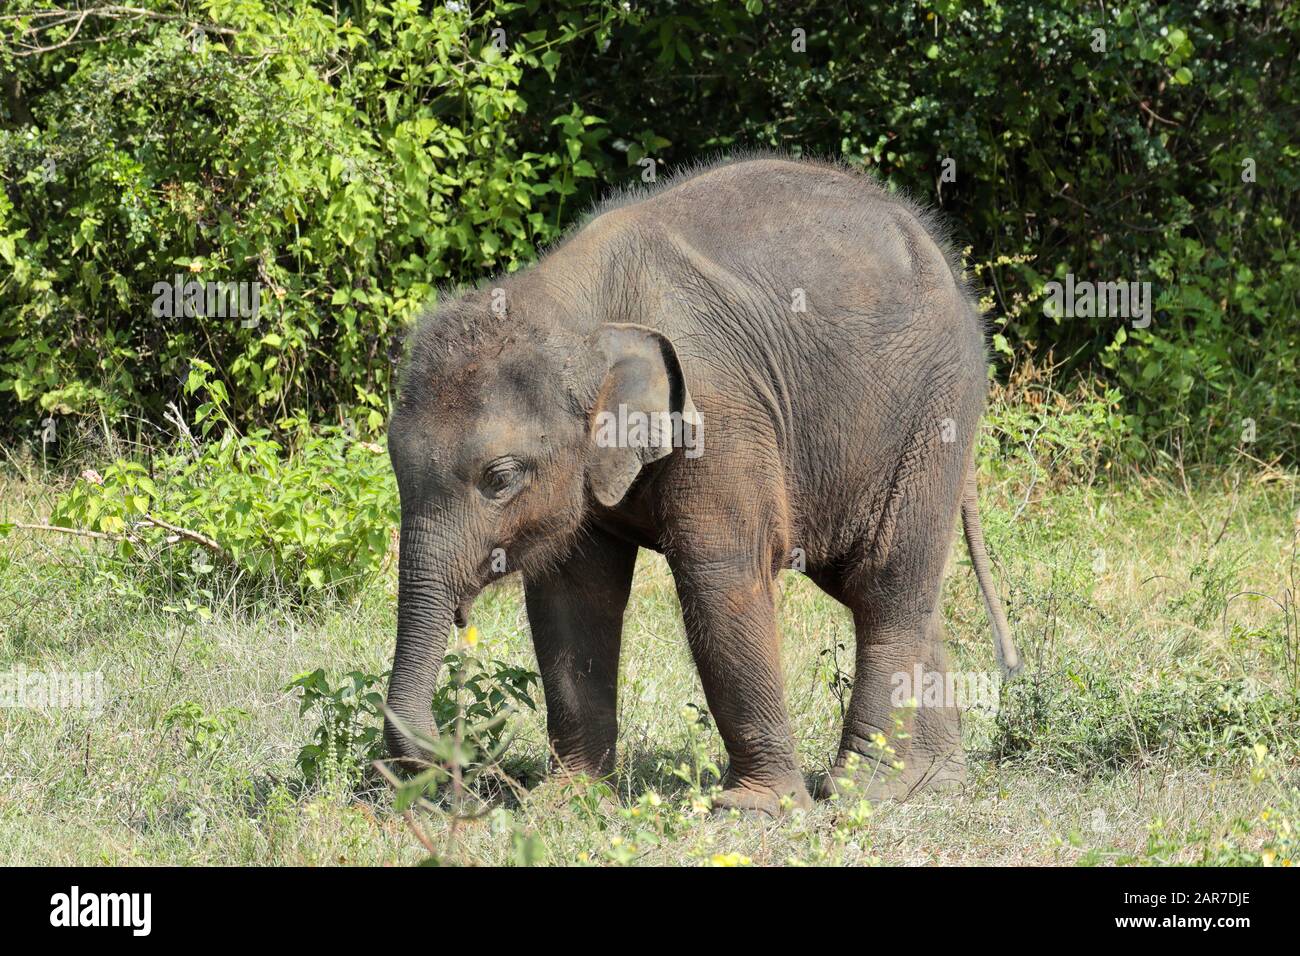 An infant indian elephant grazing Stock Photo